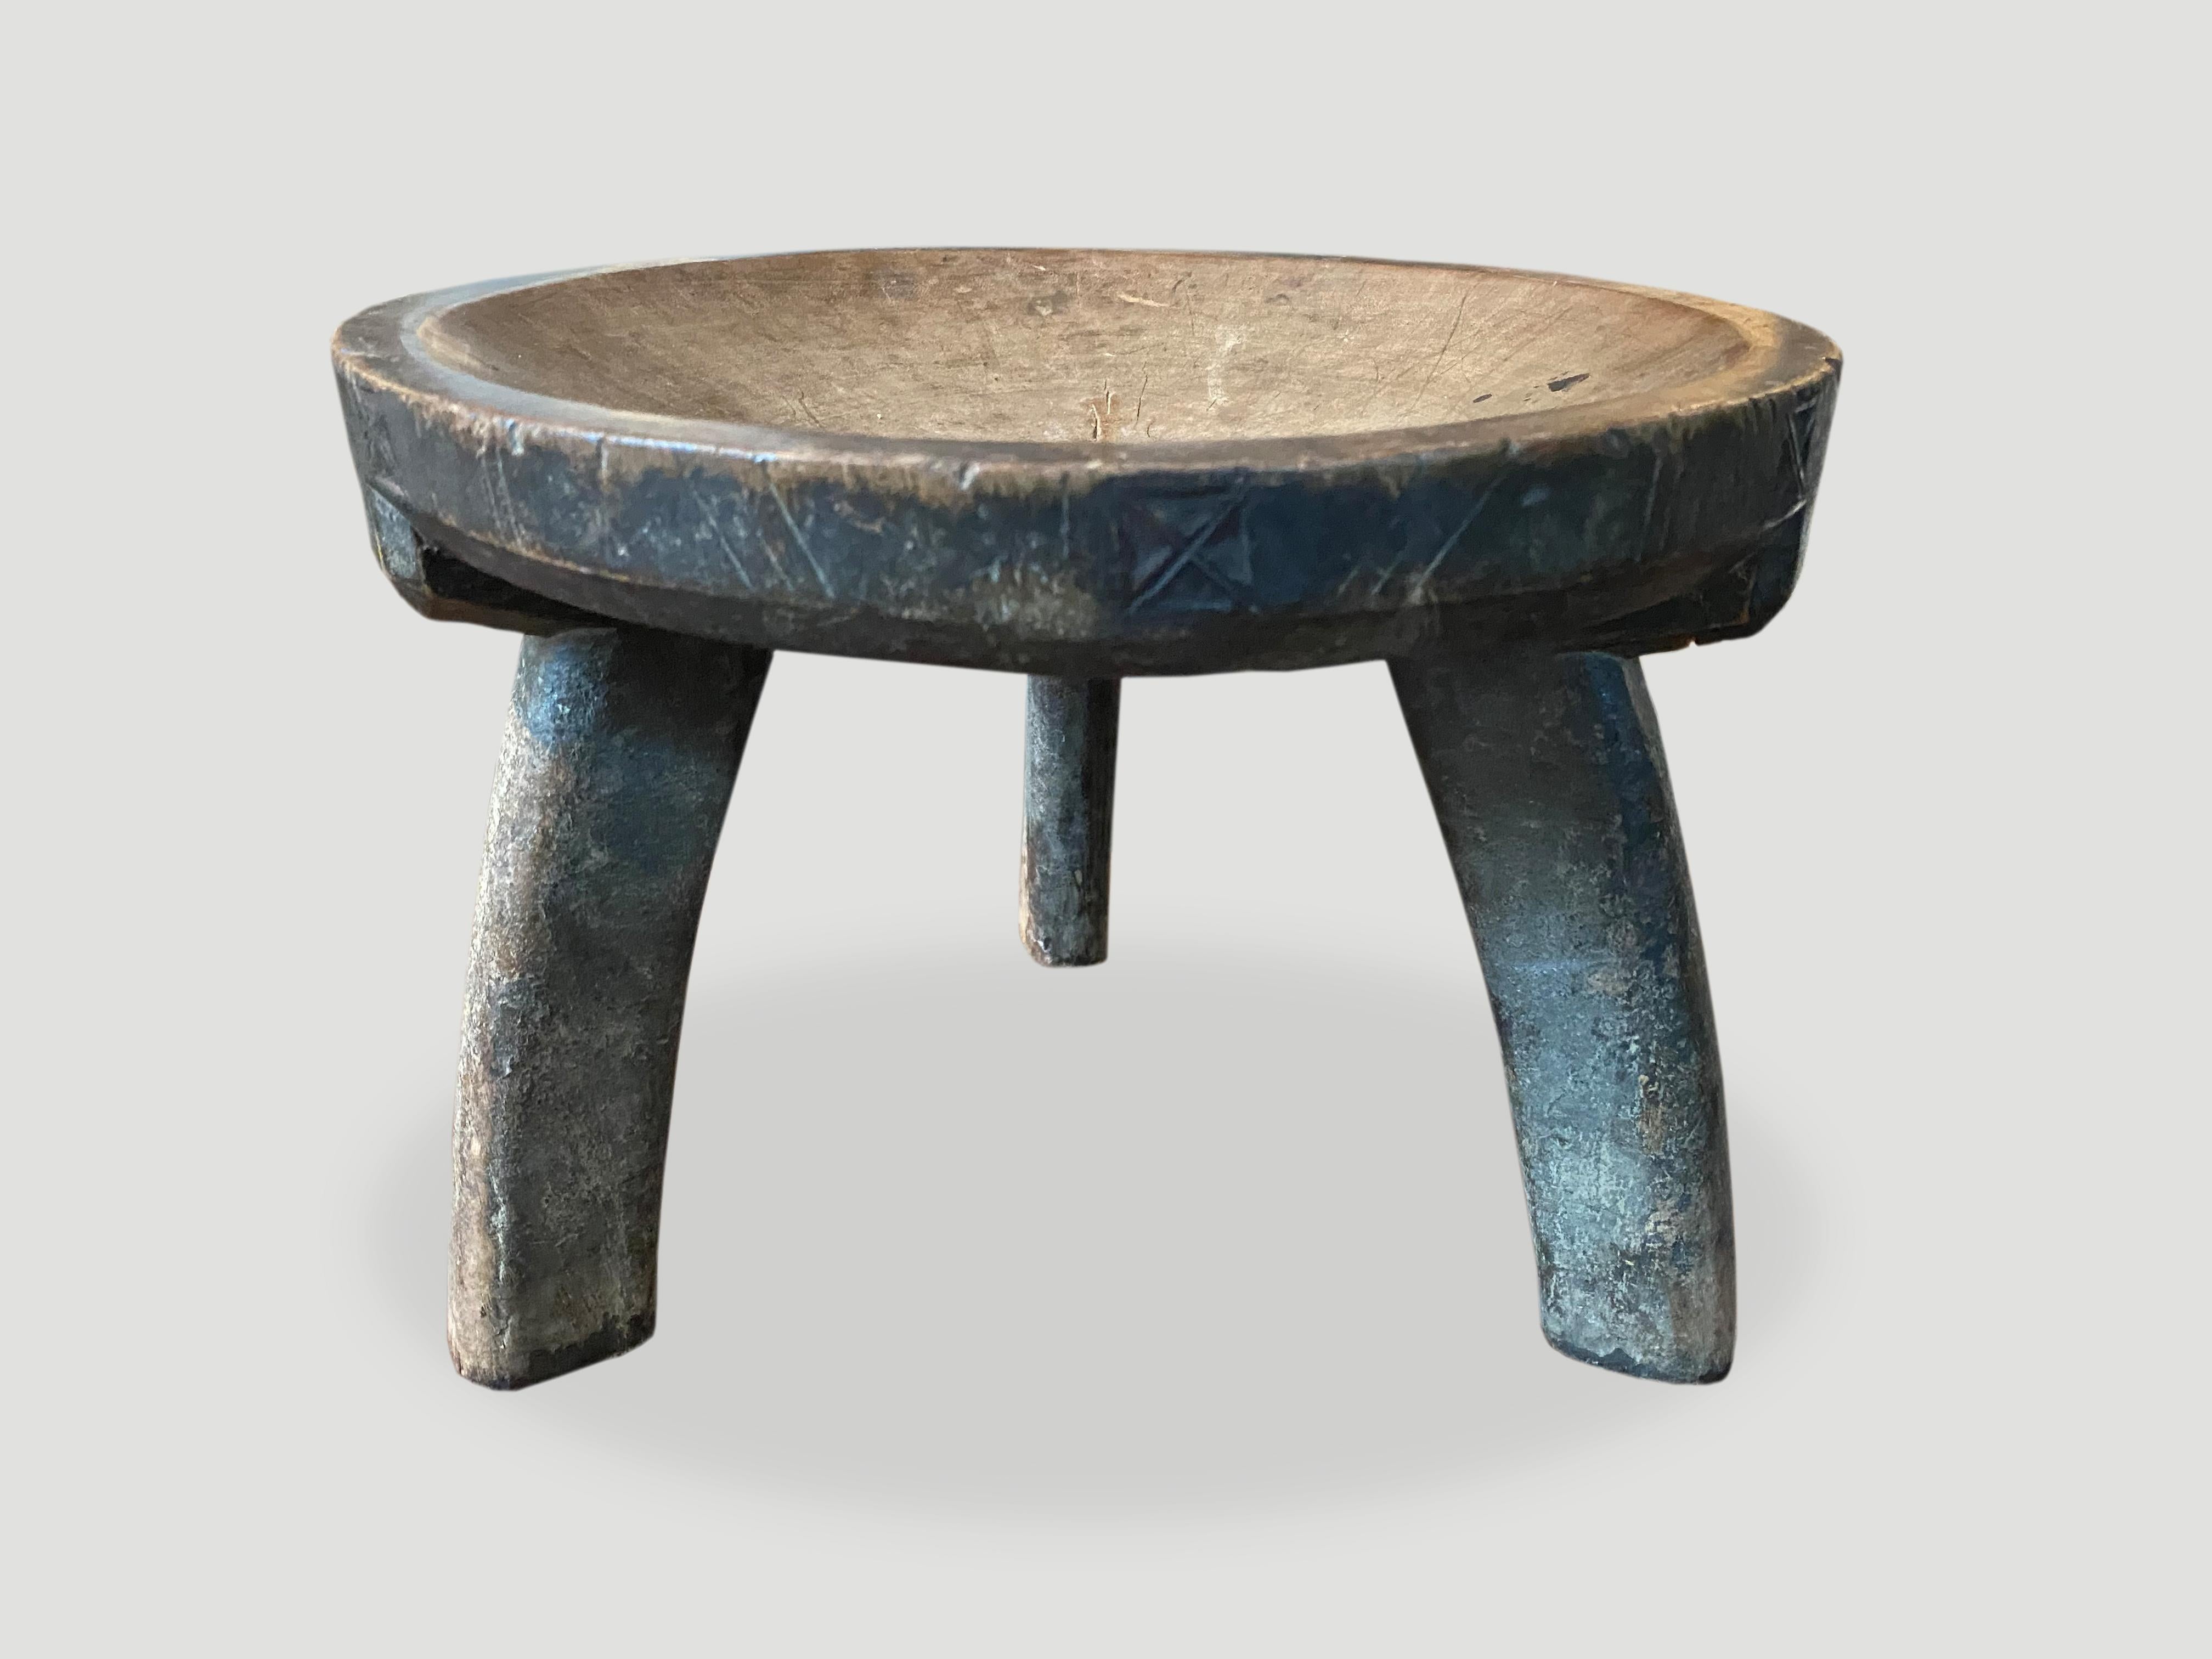 Beautiful hand carved African teak wood stool, side table or bowl with lovely patina and carvings. The entire piece is hand carved out of a single piece of wood.

This stool or bowl was sourced in the spirit of wabi-sabi, a Japanese philosophy